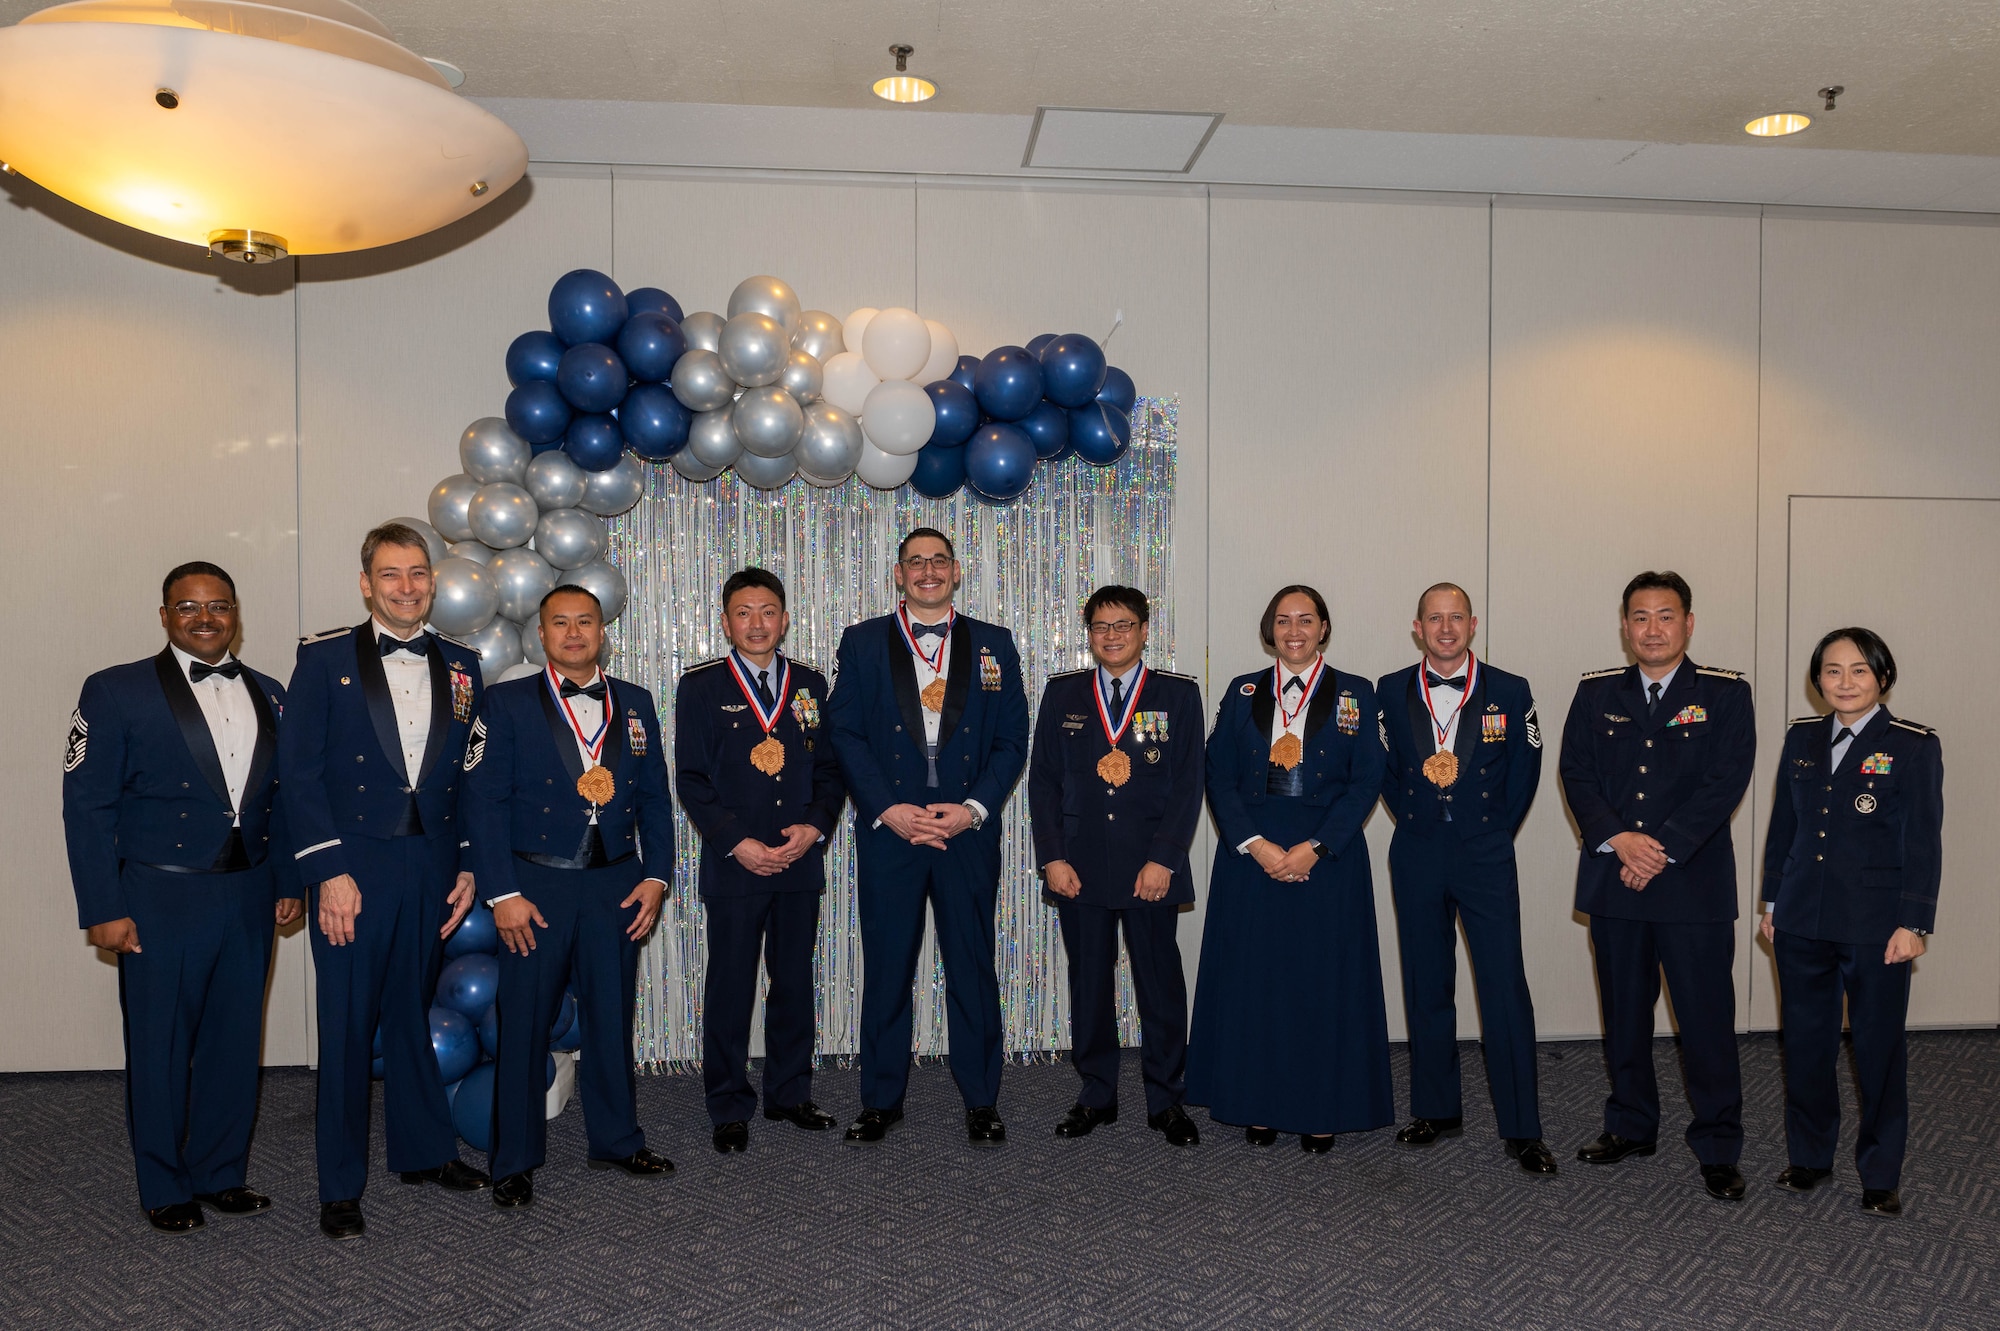 Ten people dressed in formal attire pose for a photo.